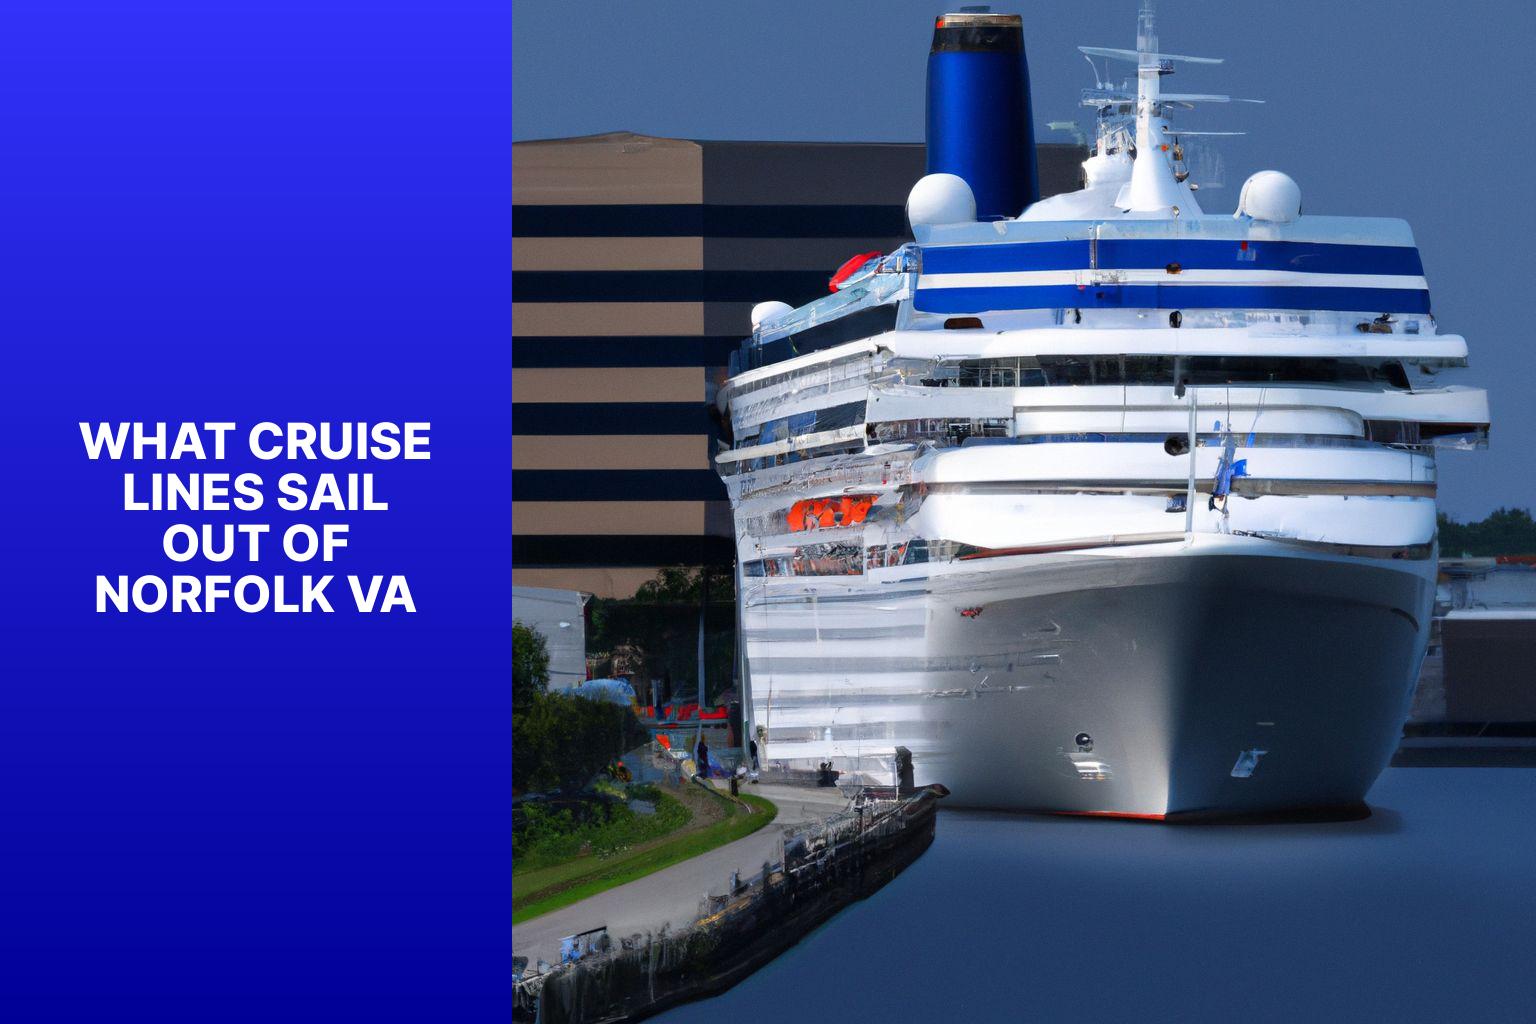 Discover the Cruise Lines Sailing Out of Norfolk VA for an Unforgettable Journey!